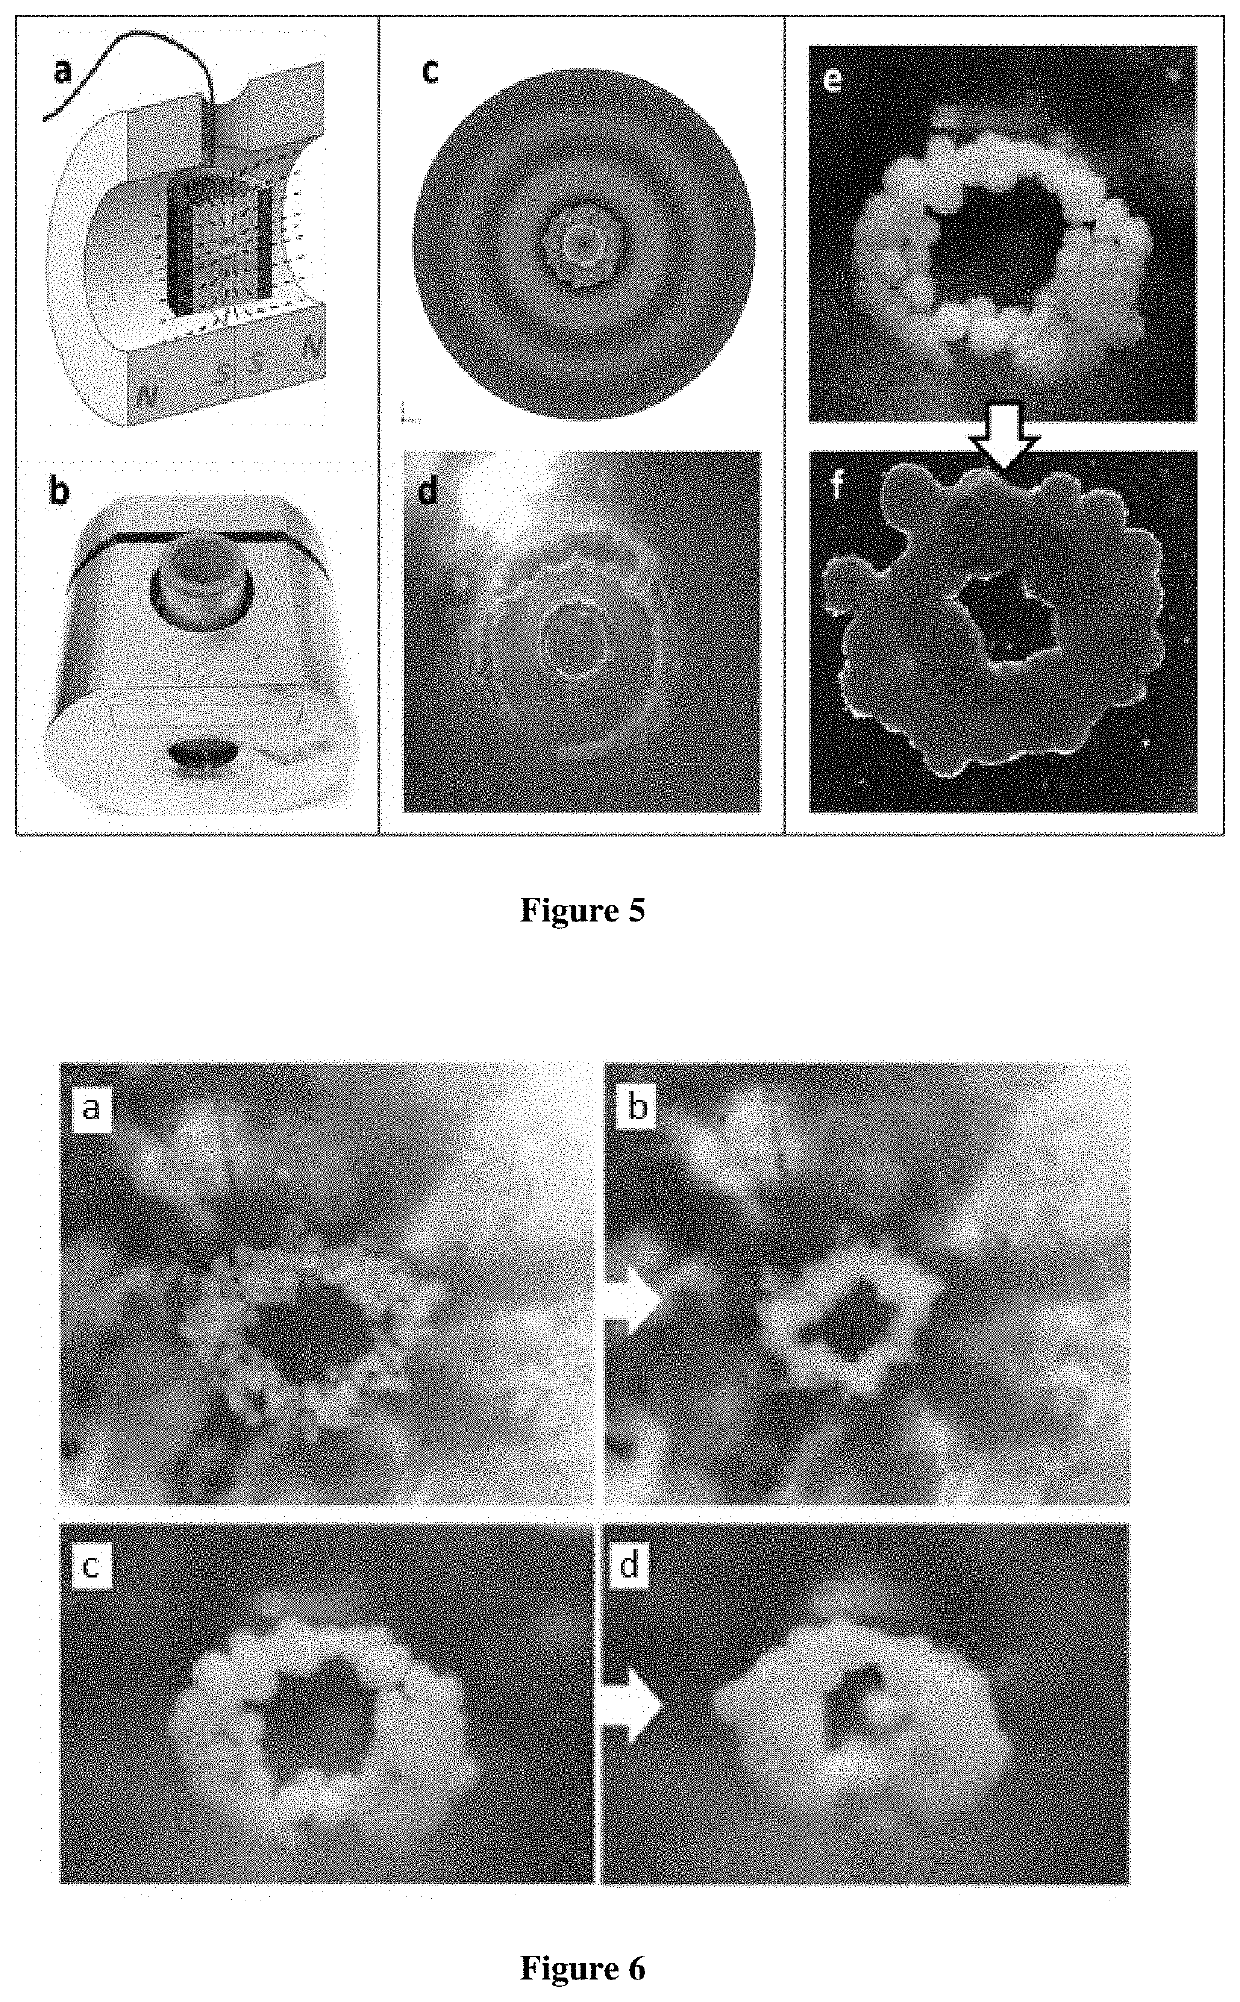 Apparatus and method for levitational biofabrication of organ and tissue engineered constructs using tissue spheroids and magnetoacoustic bifield